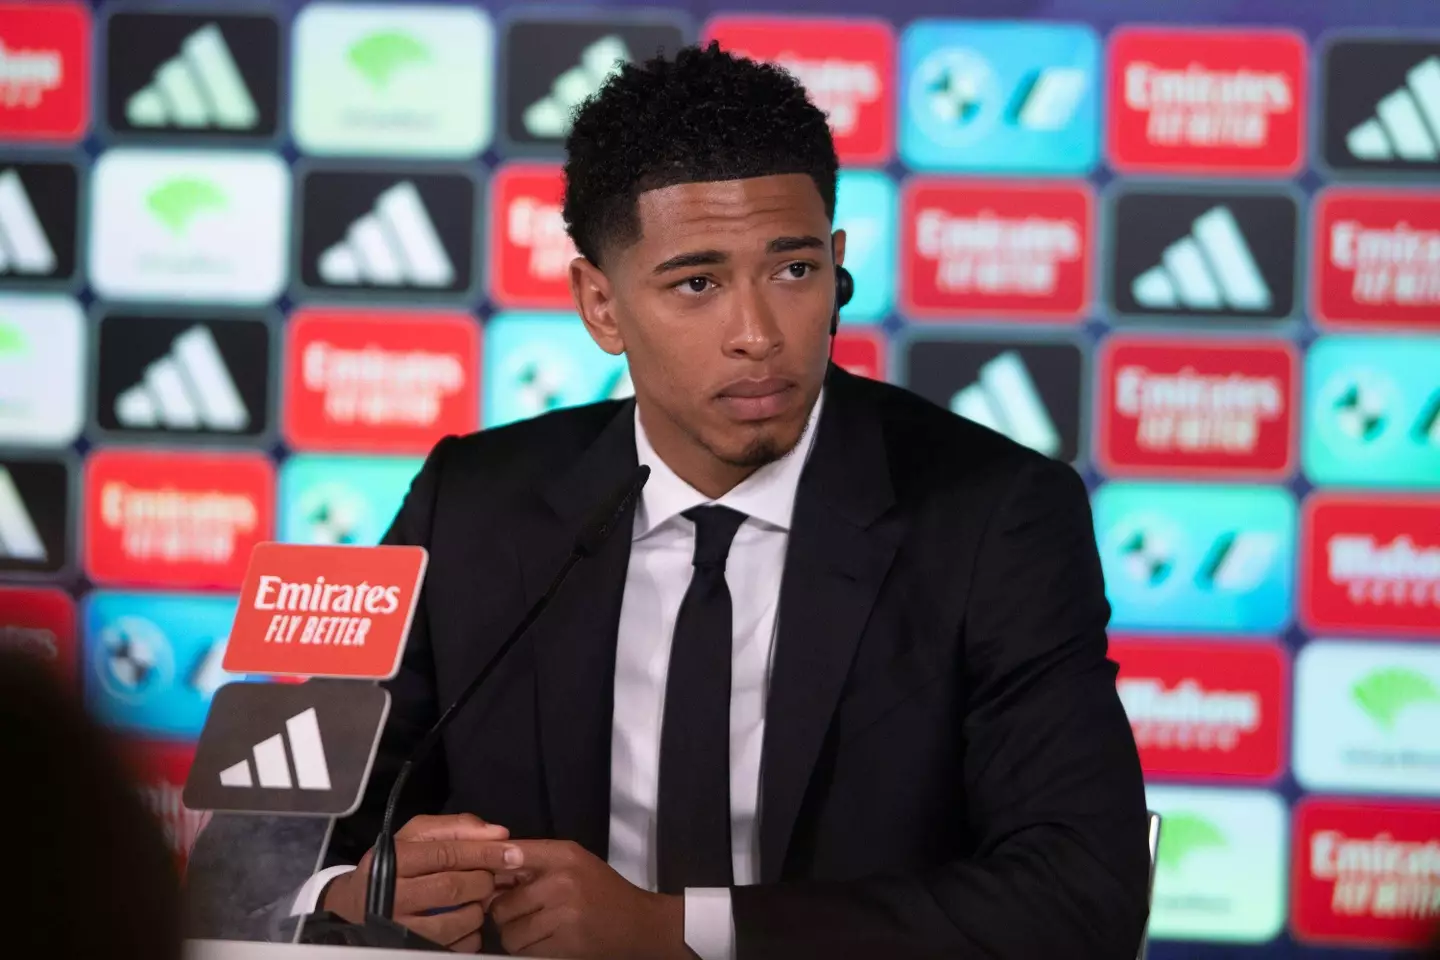 Bellingham looked assured during his first press conference as a Real player. Image: Alamy